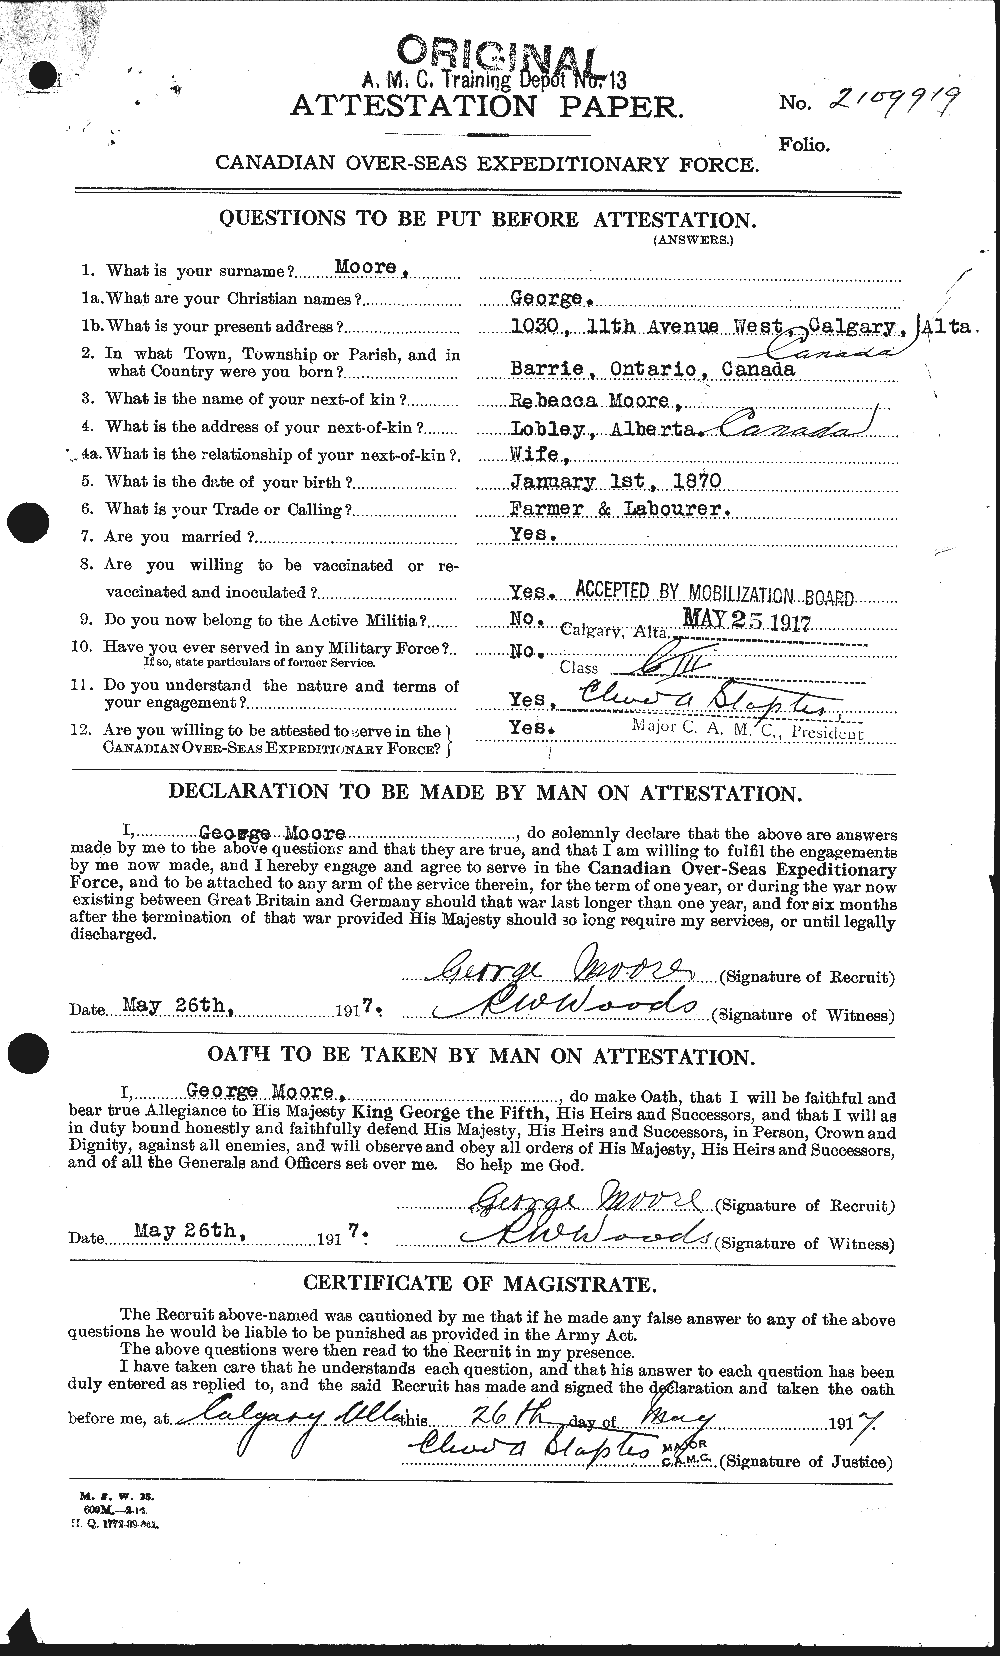 Personnel Records of the First World War - CEF 509404a